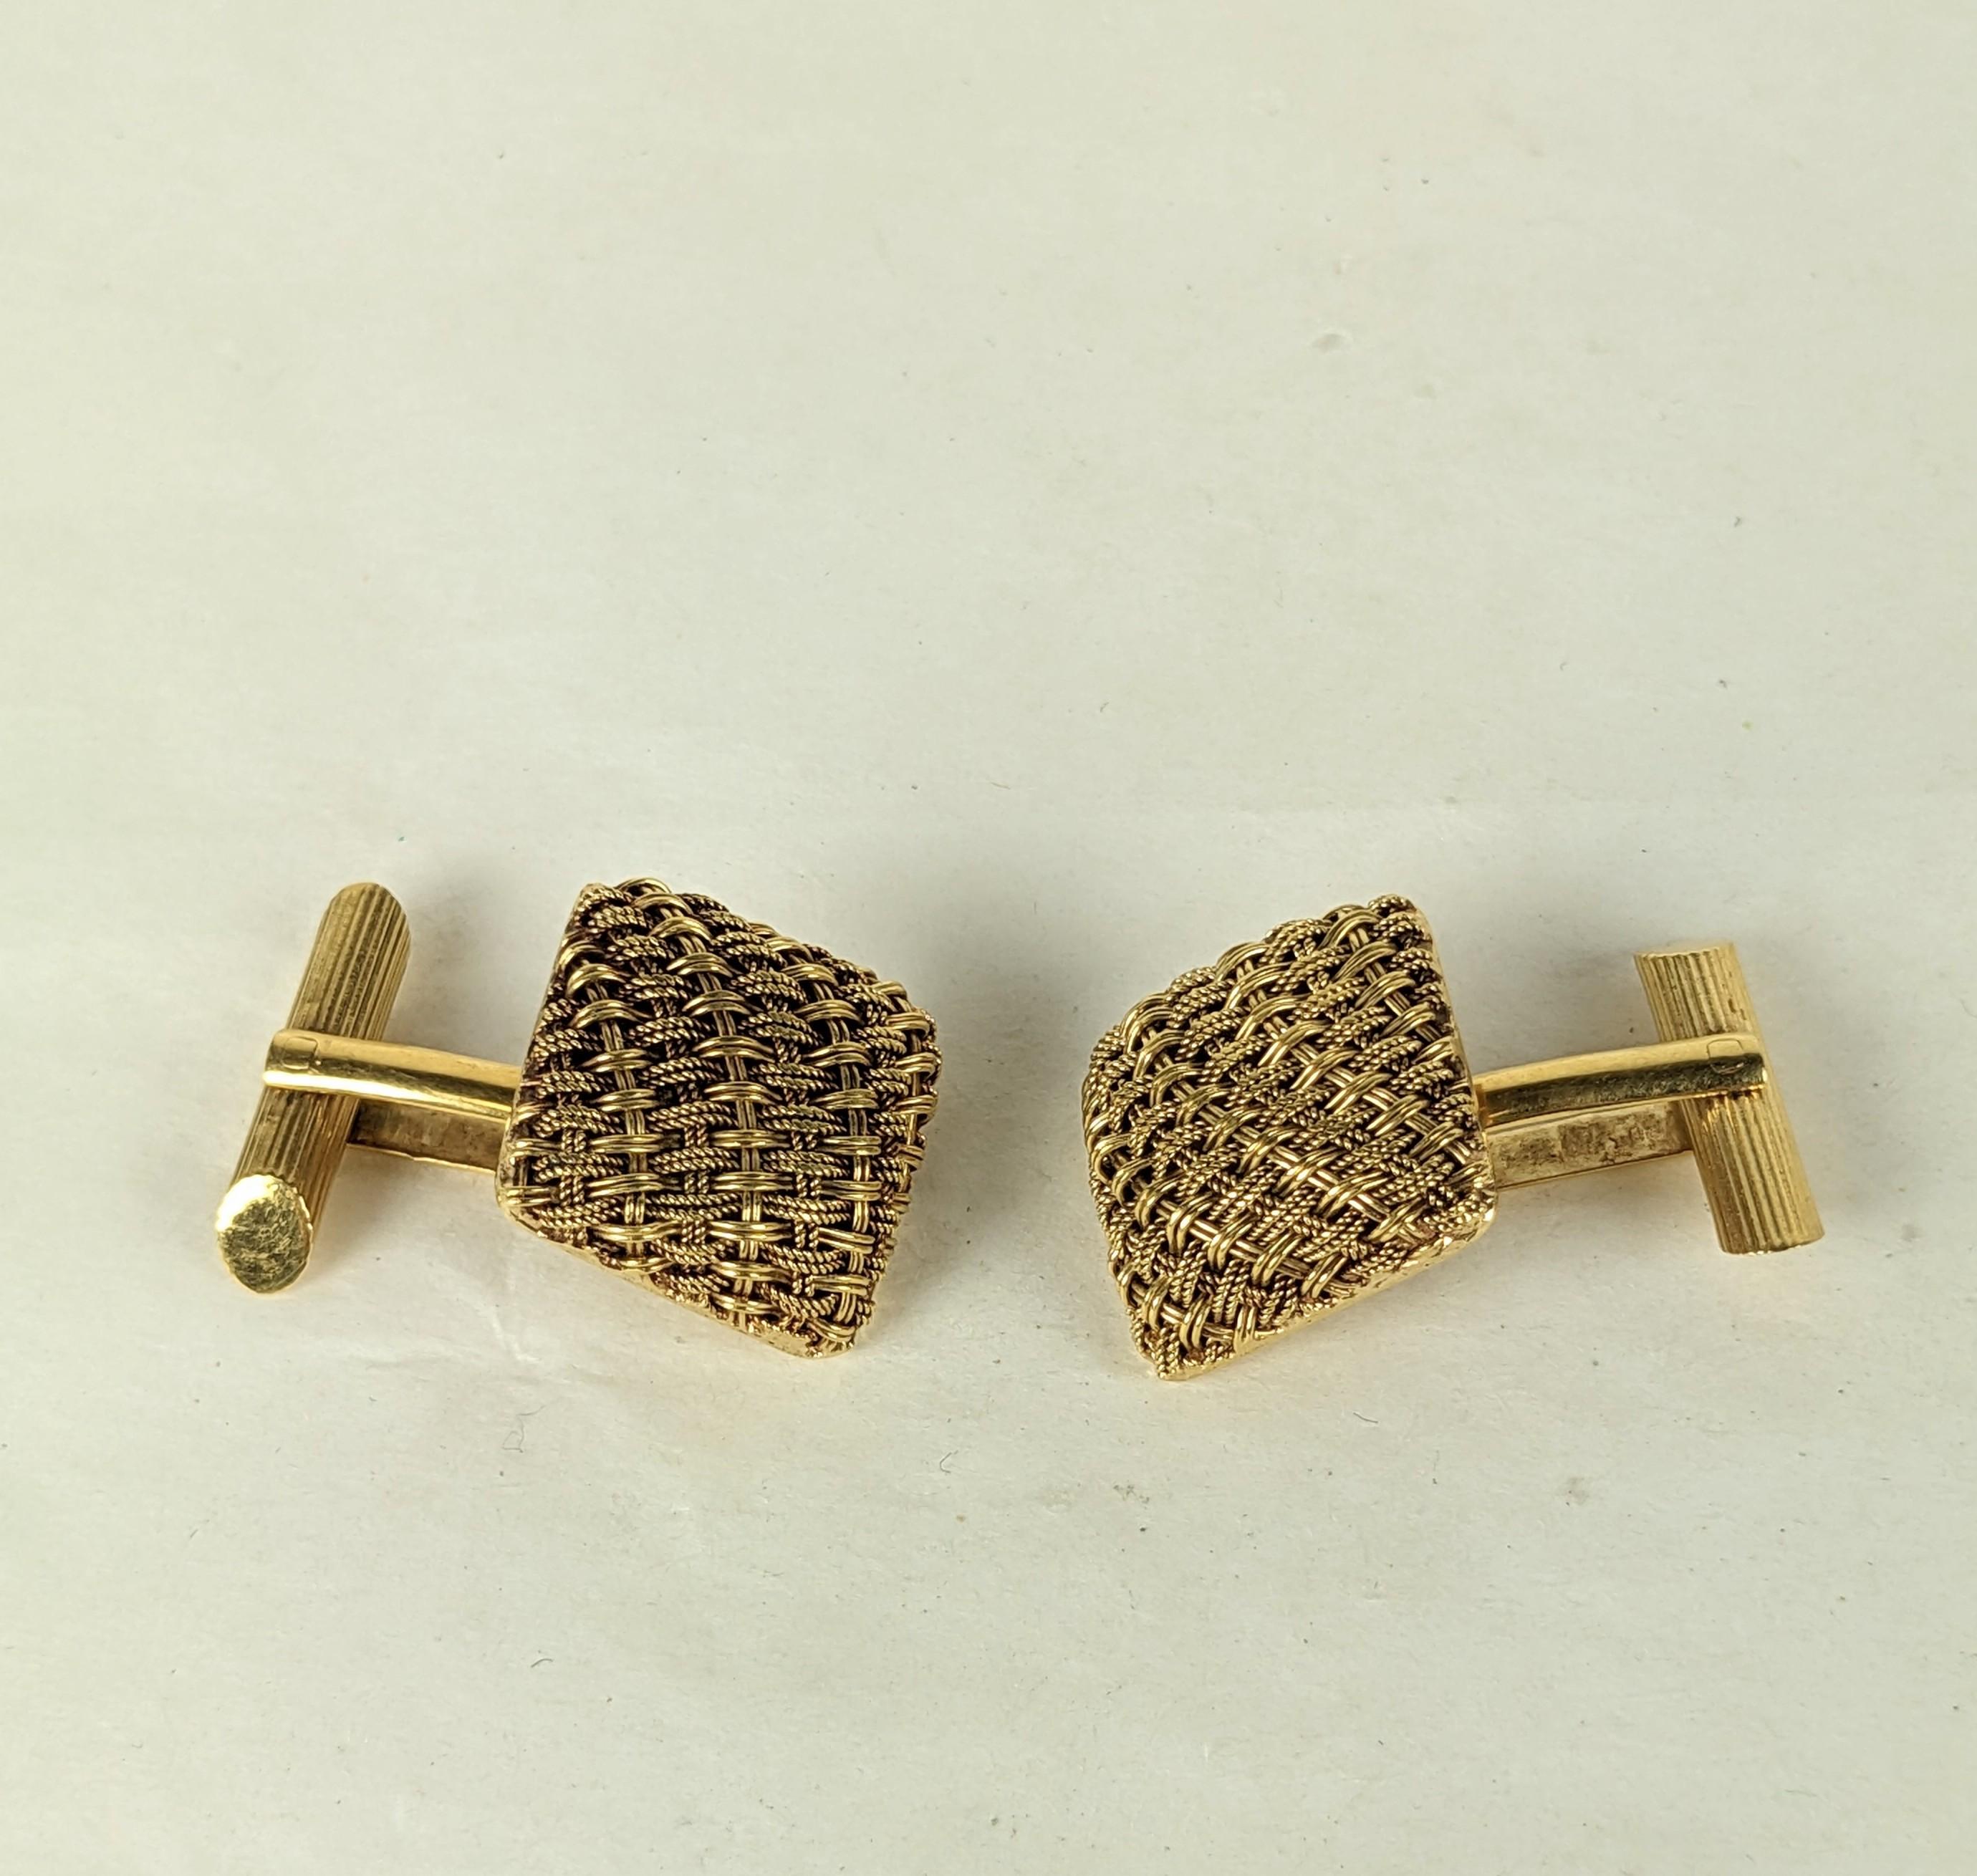 Woven 18k Textured Cufflinks In Good Condition For Sale In Riverdale, NY